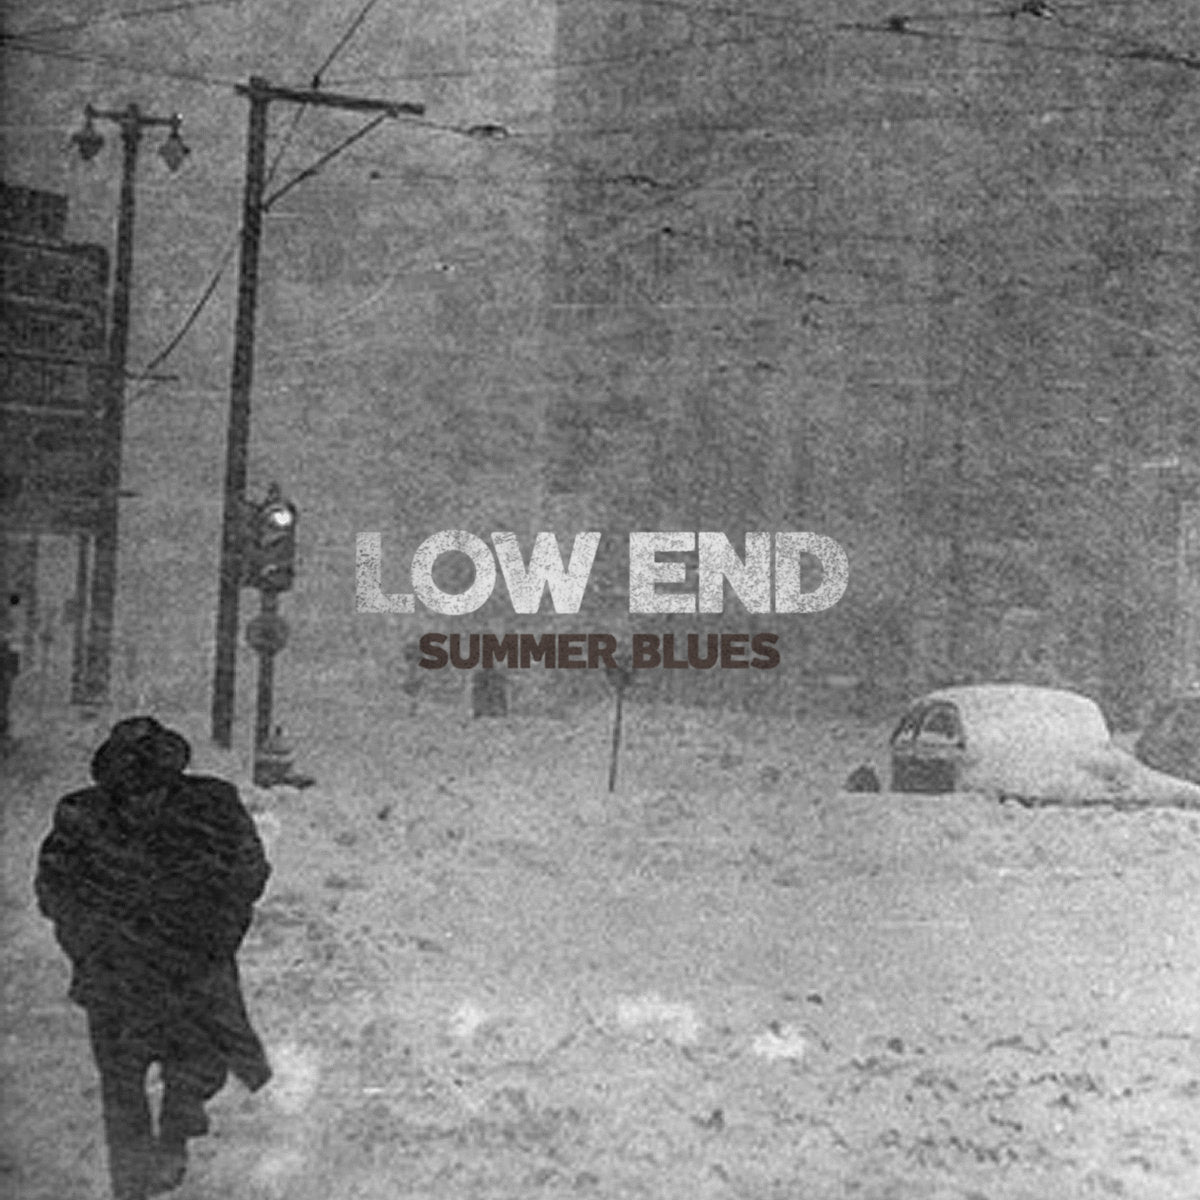 LOW END 'Summer Blues' Flexi 7" / COLORED EDITION